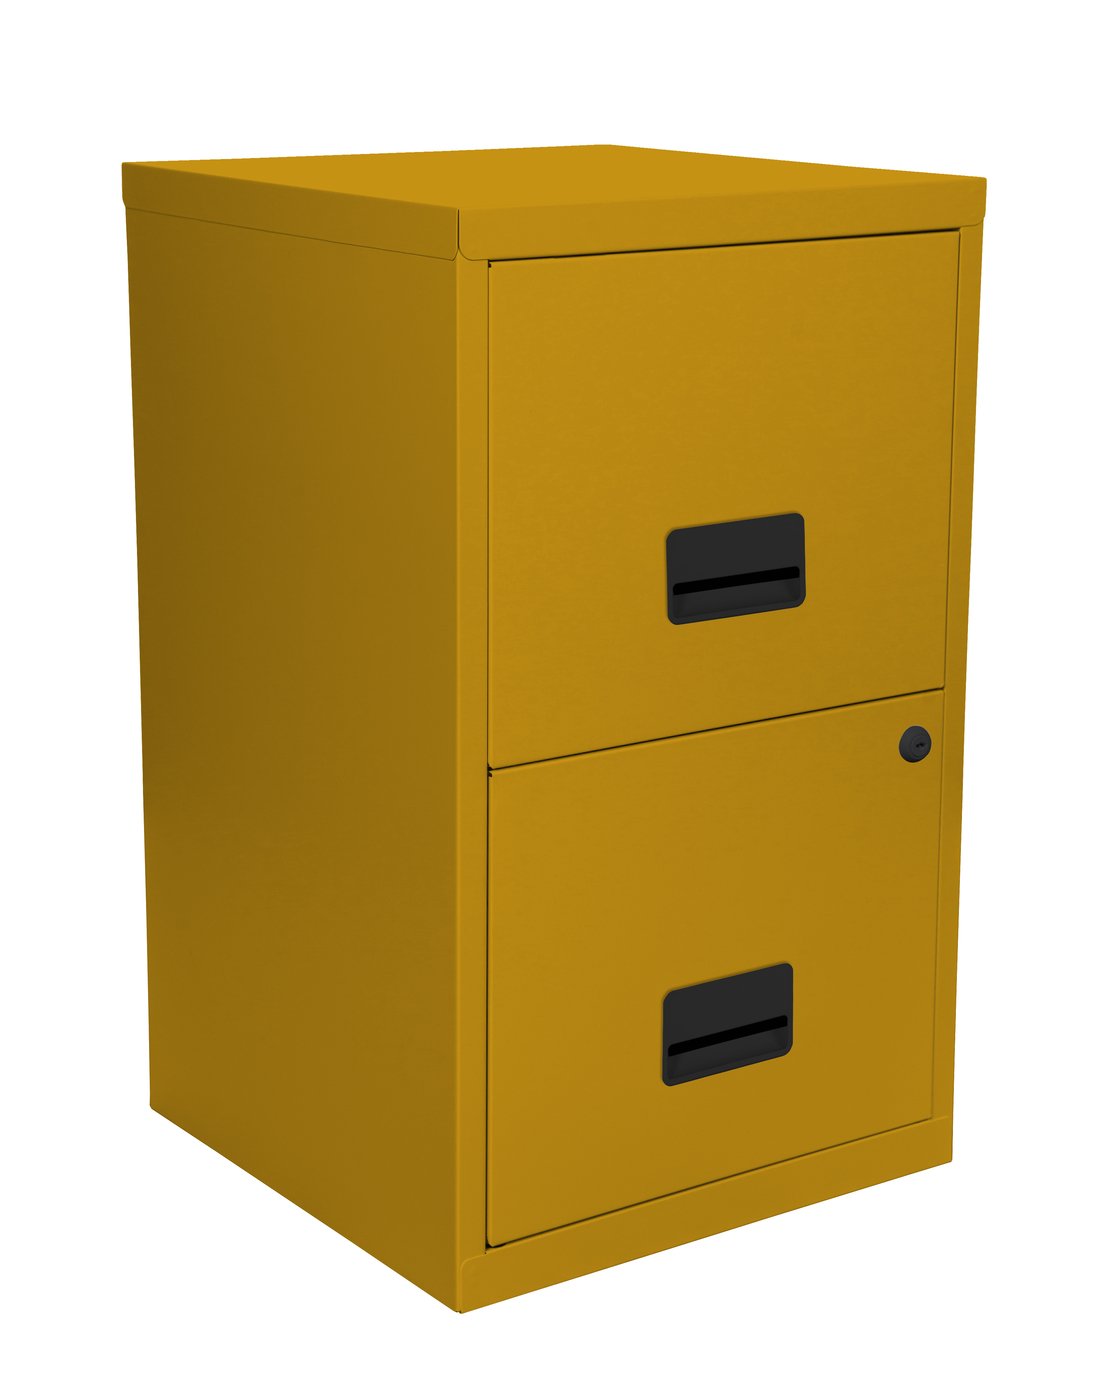 Pierre Henry 2 Drawer Metal Filing Cabinet review